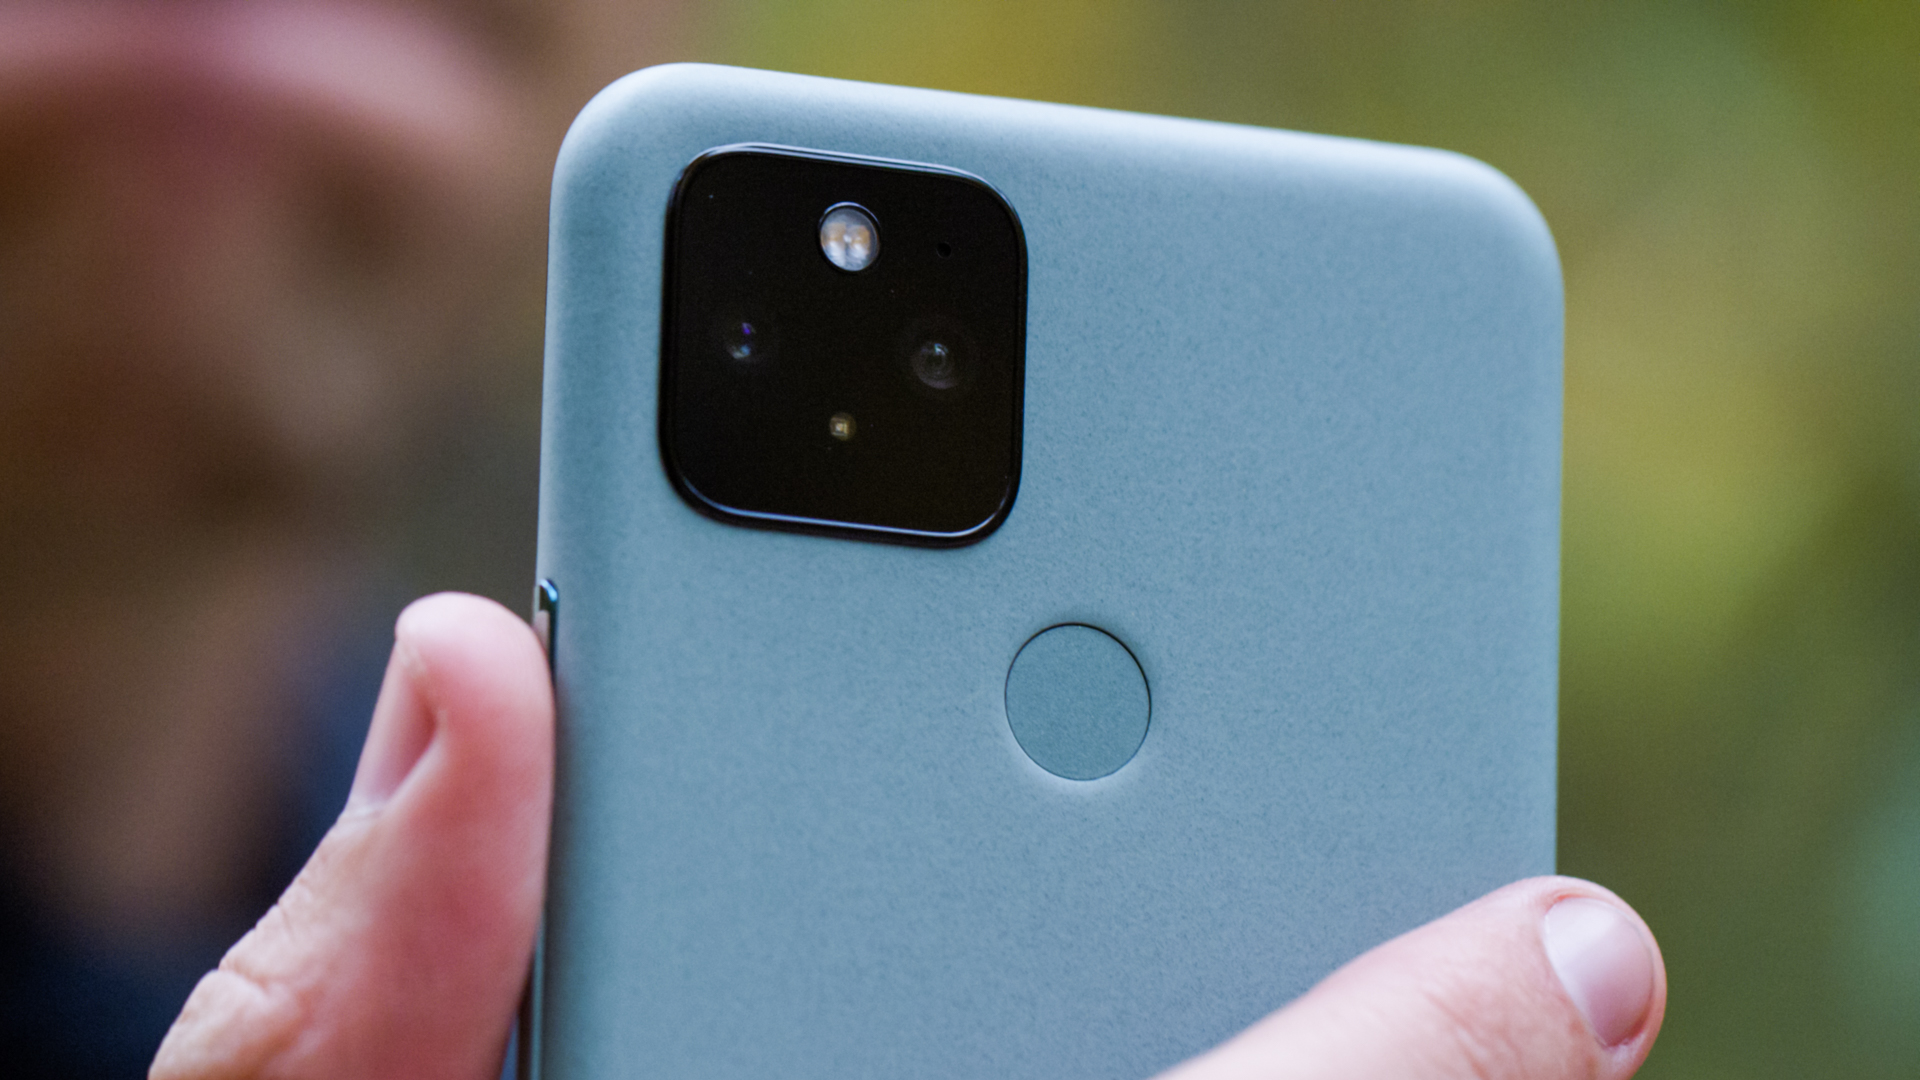 How Google's Pixel 2 Now Playing song identification works